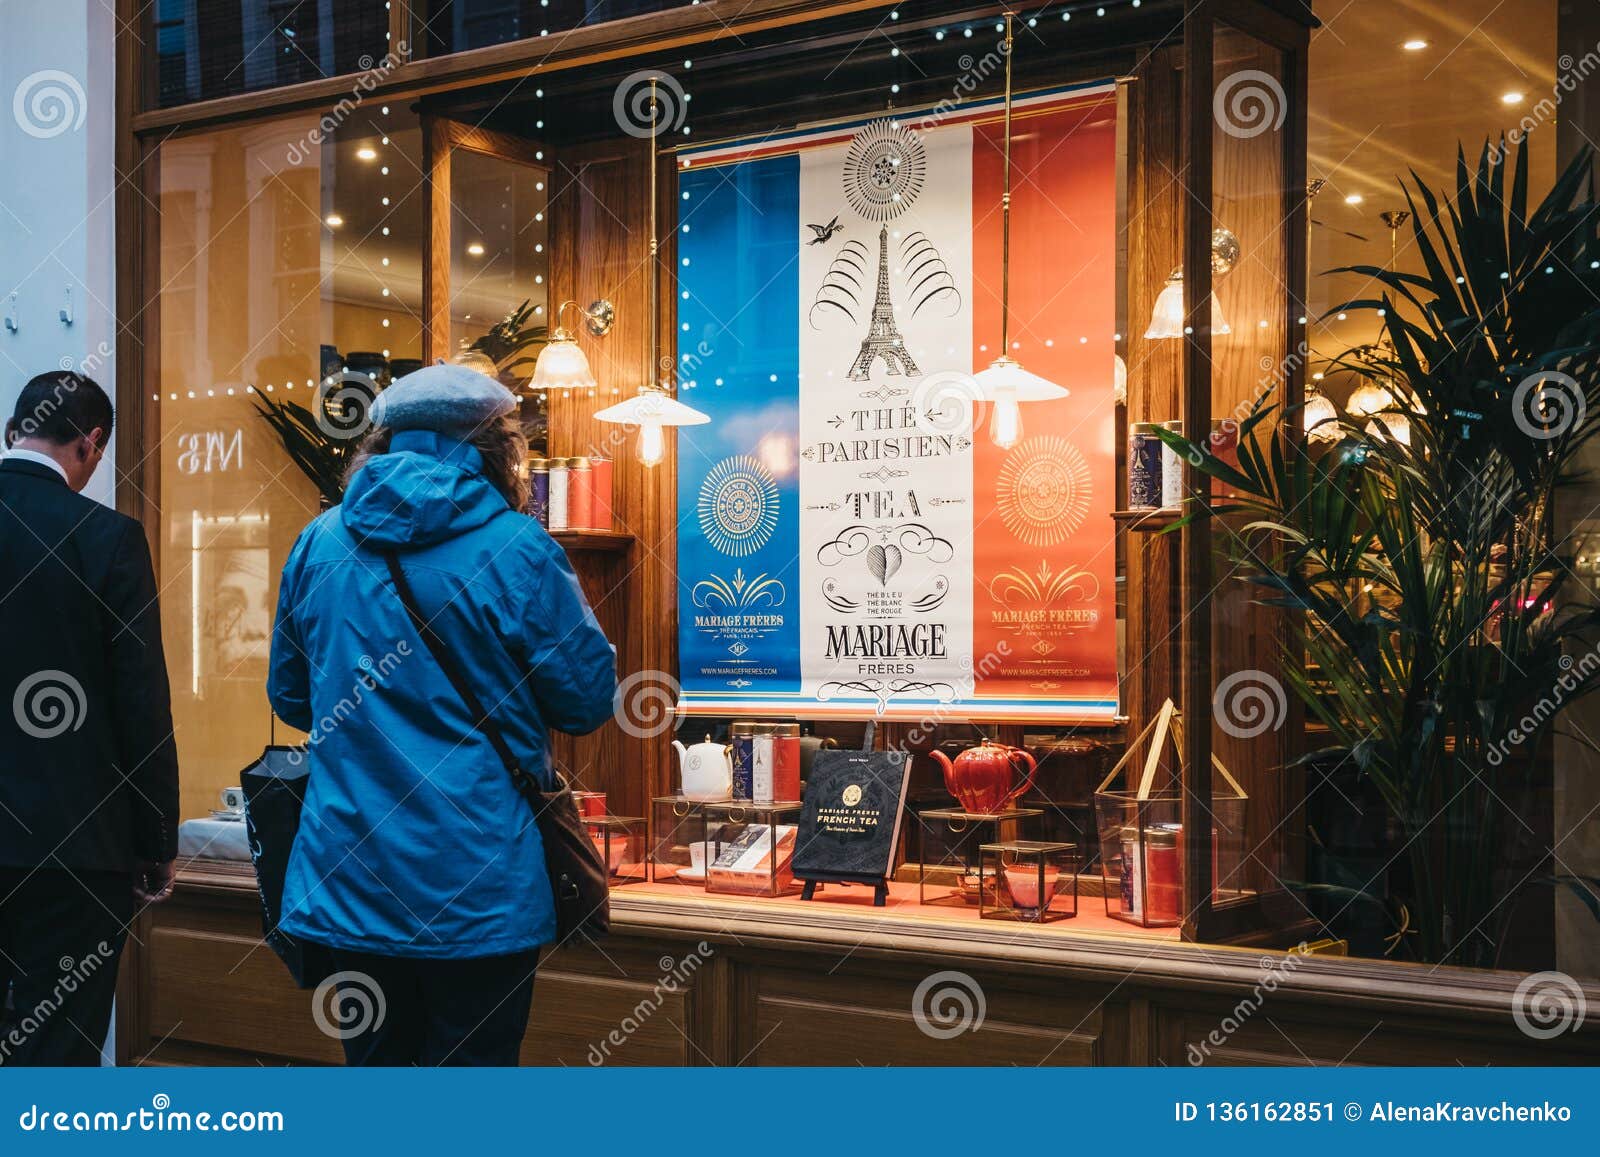 People Looking at the Window of Mariage Freres Tea in Covent